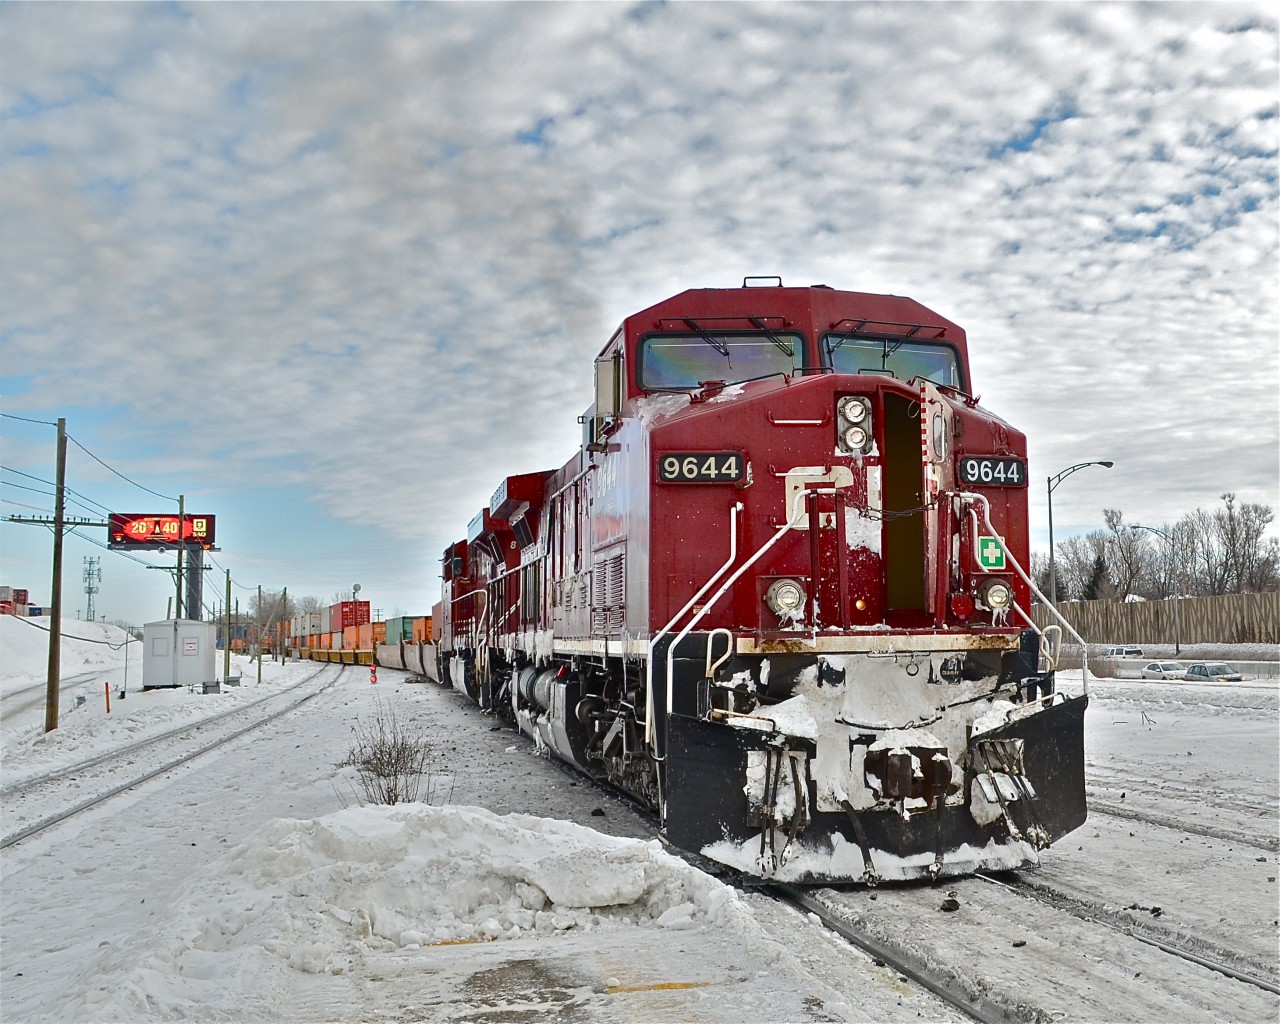 CP 9644 & CP 8760 do some switching at Lachine before heading westwards with a stack train. For more train photos, check out http://www.flickr.com/photos/mtlwestrailfan/